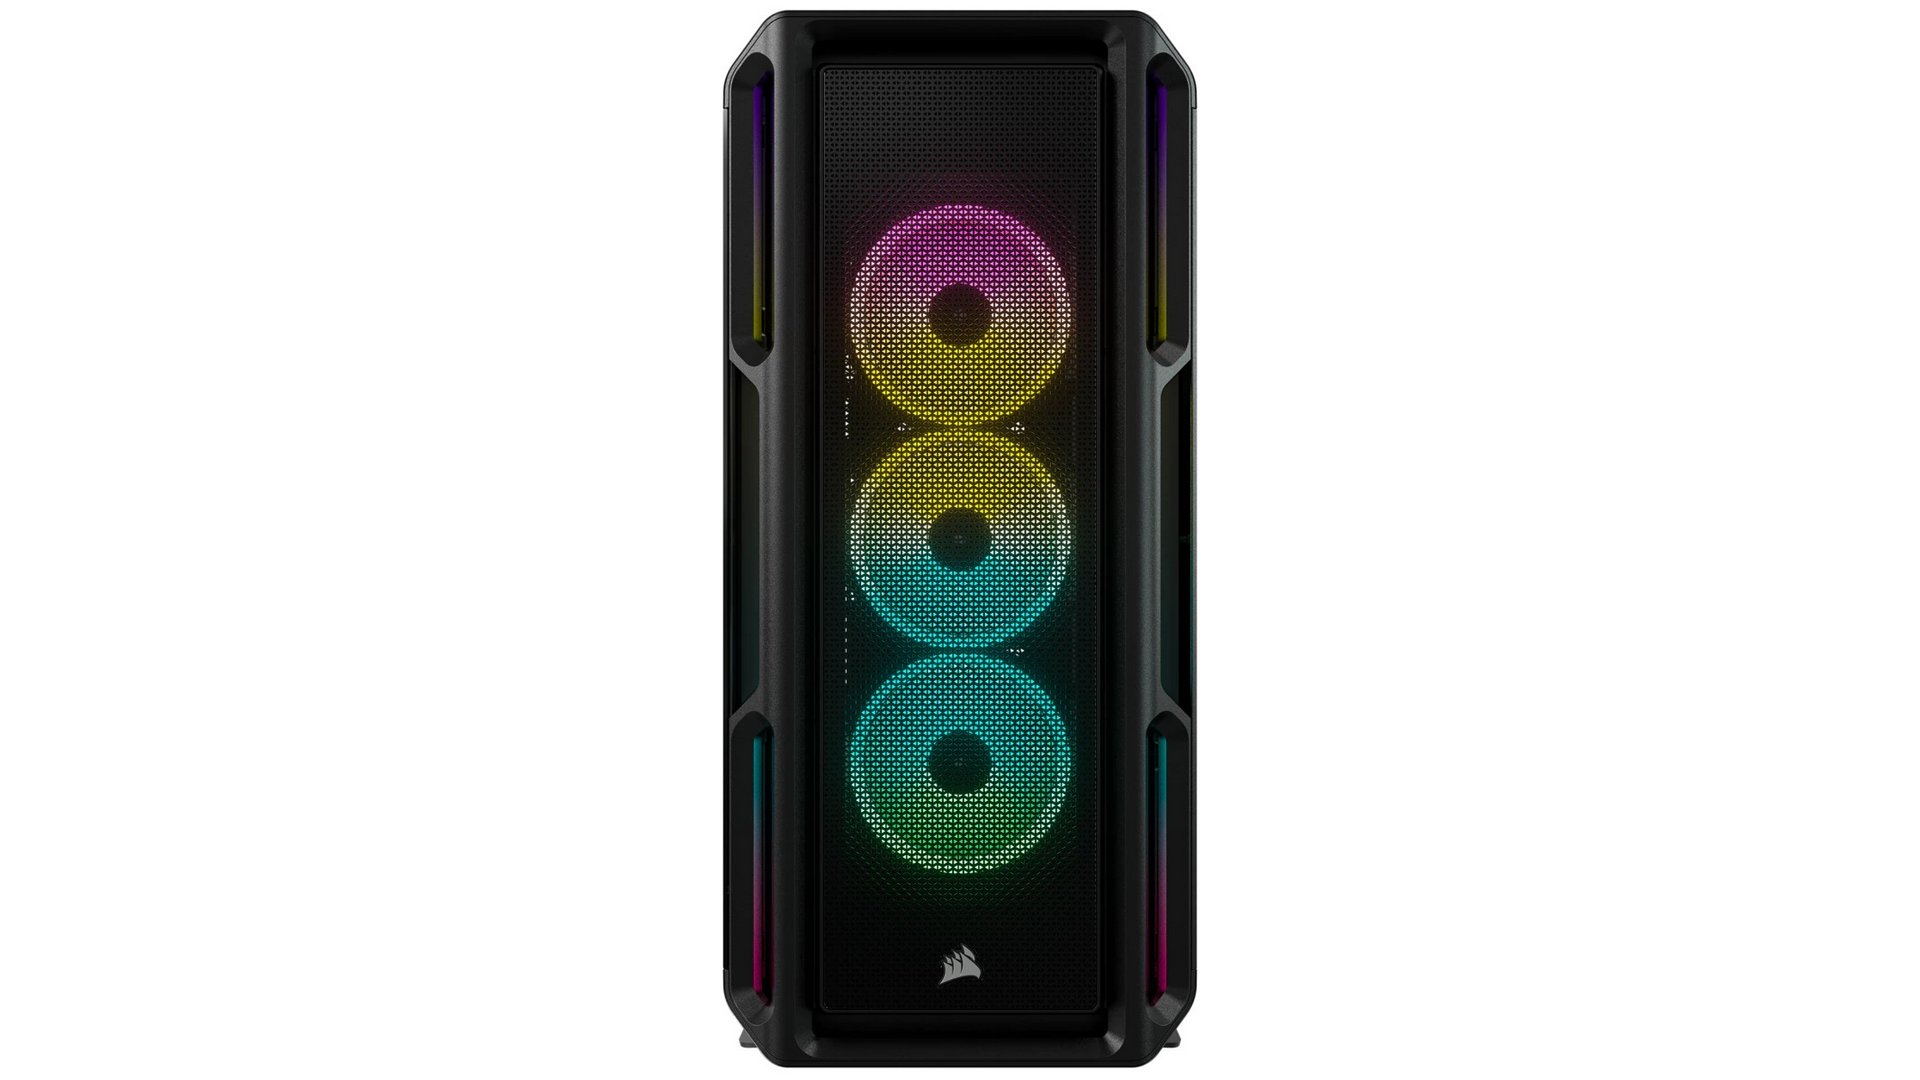 Vỏ Case Corsair iCUE 5000T RGB Tempered Glass (Mid-tower | Black)